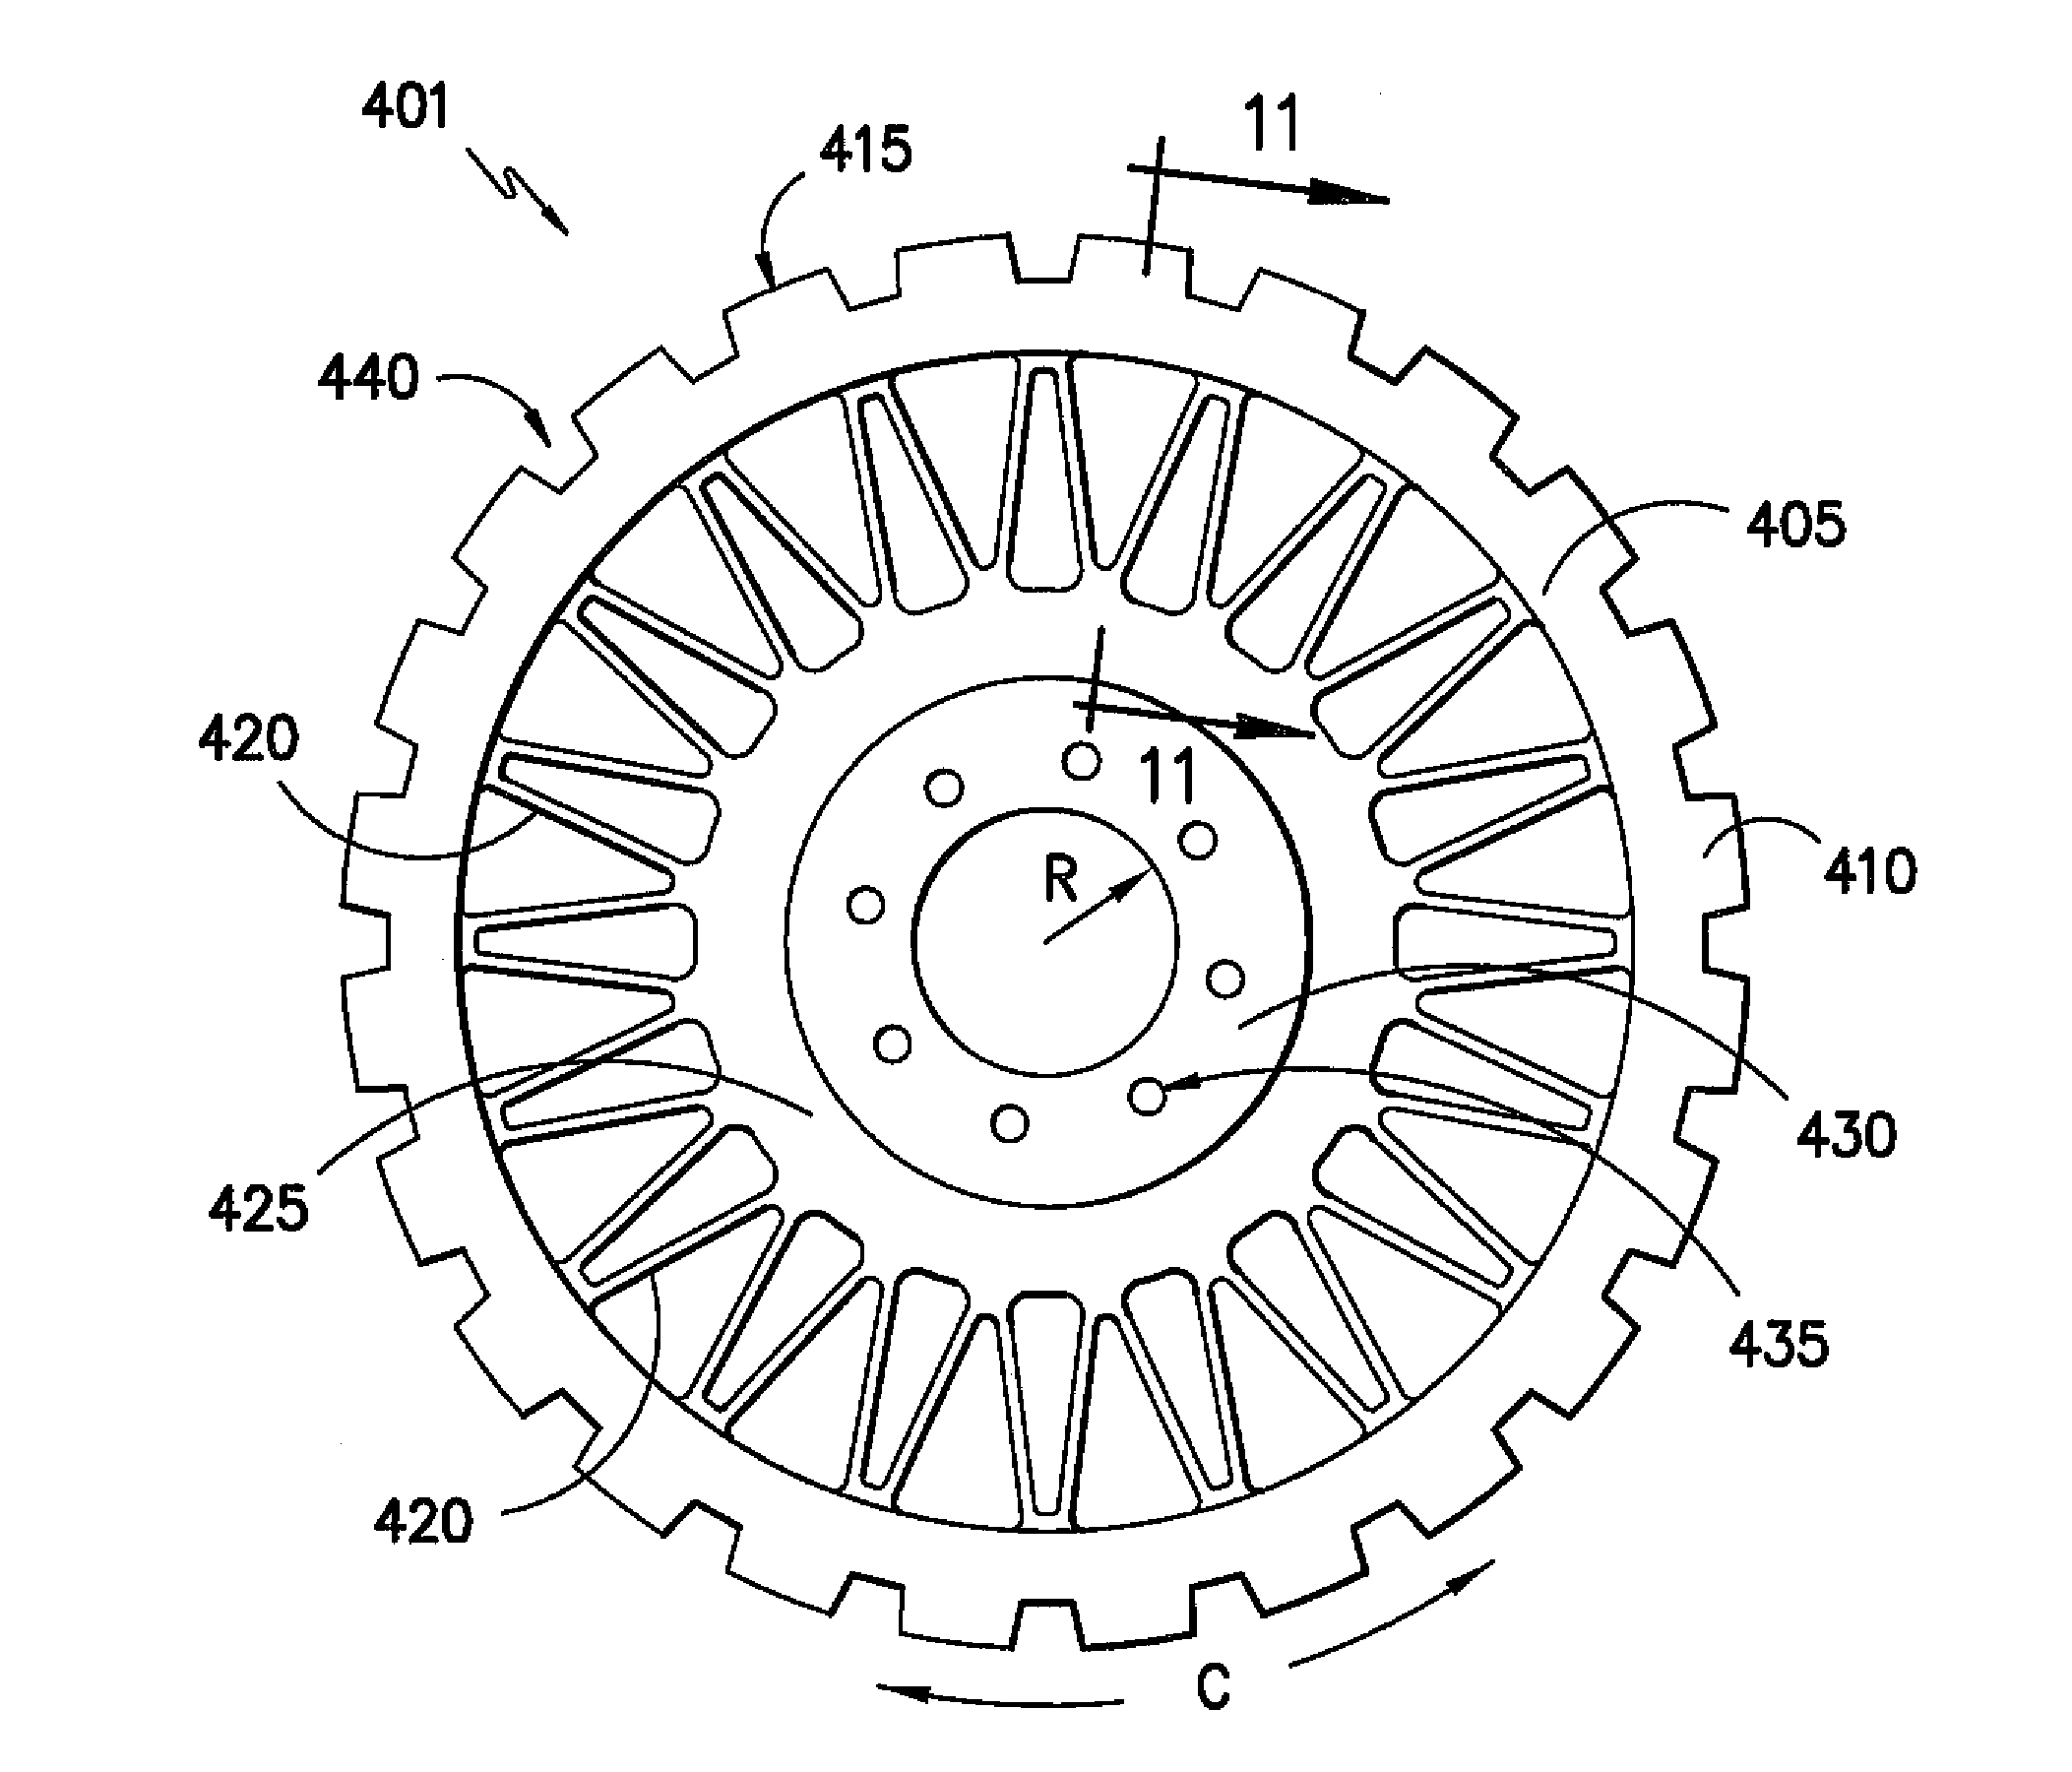 Structurally supported, non-pneumatic wheel with continuous loop reinforcement assembly